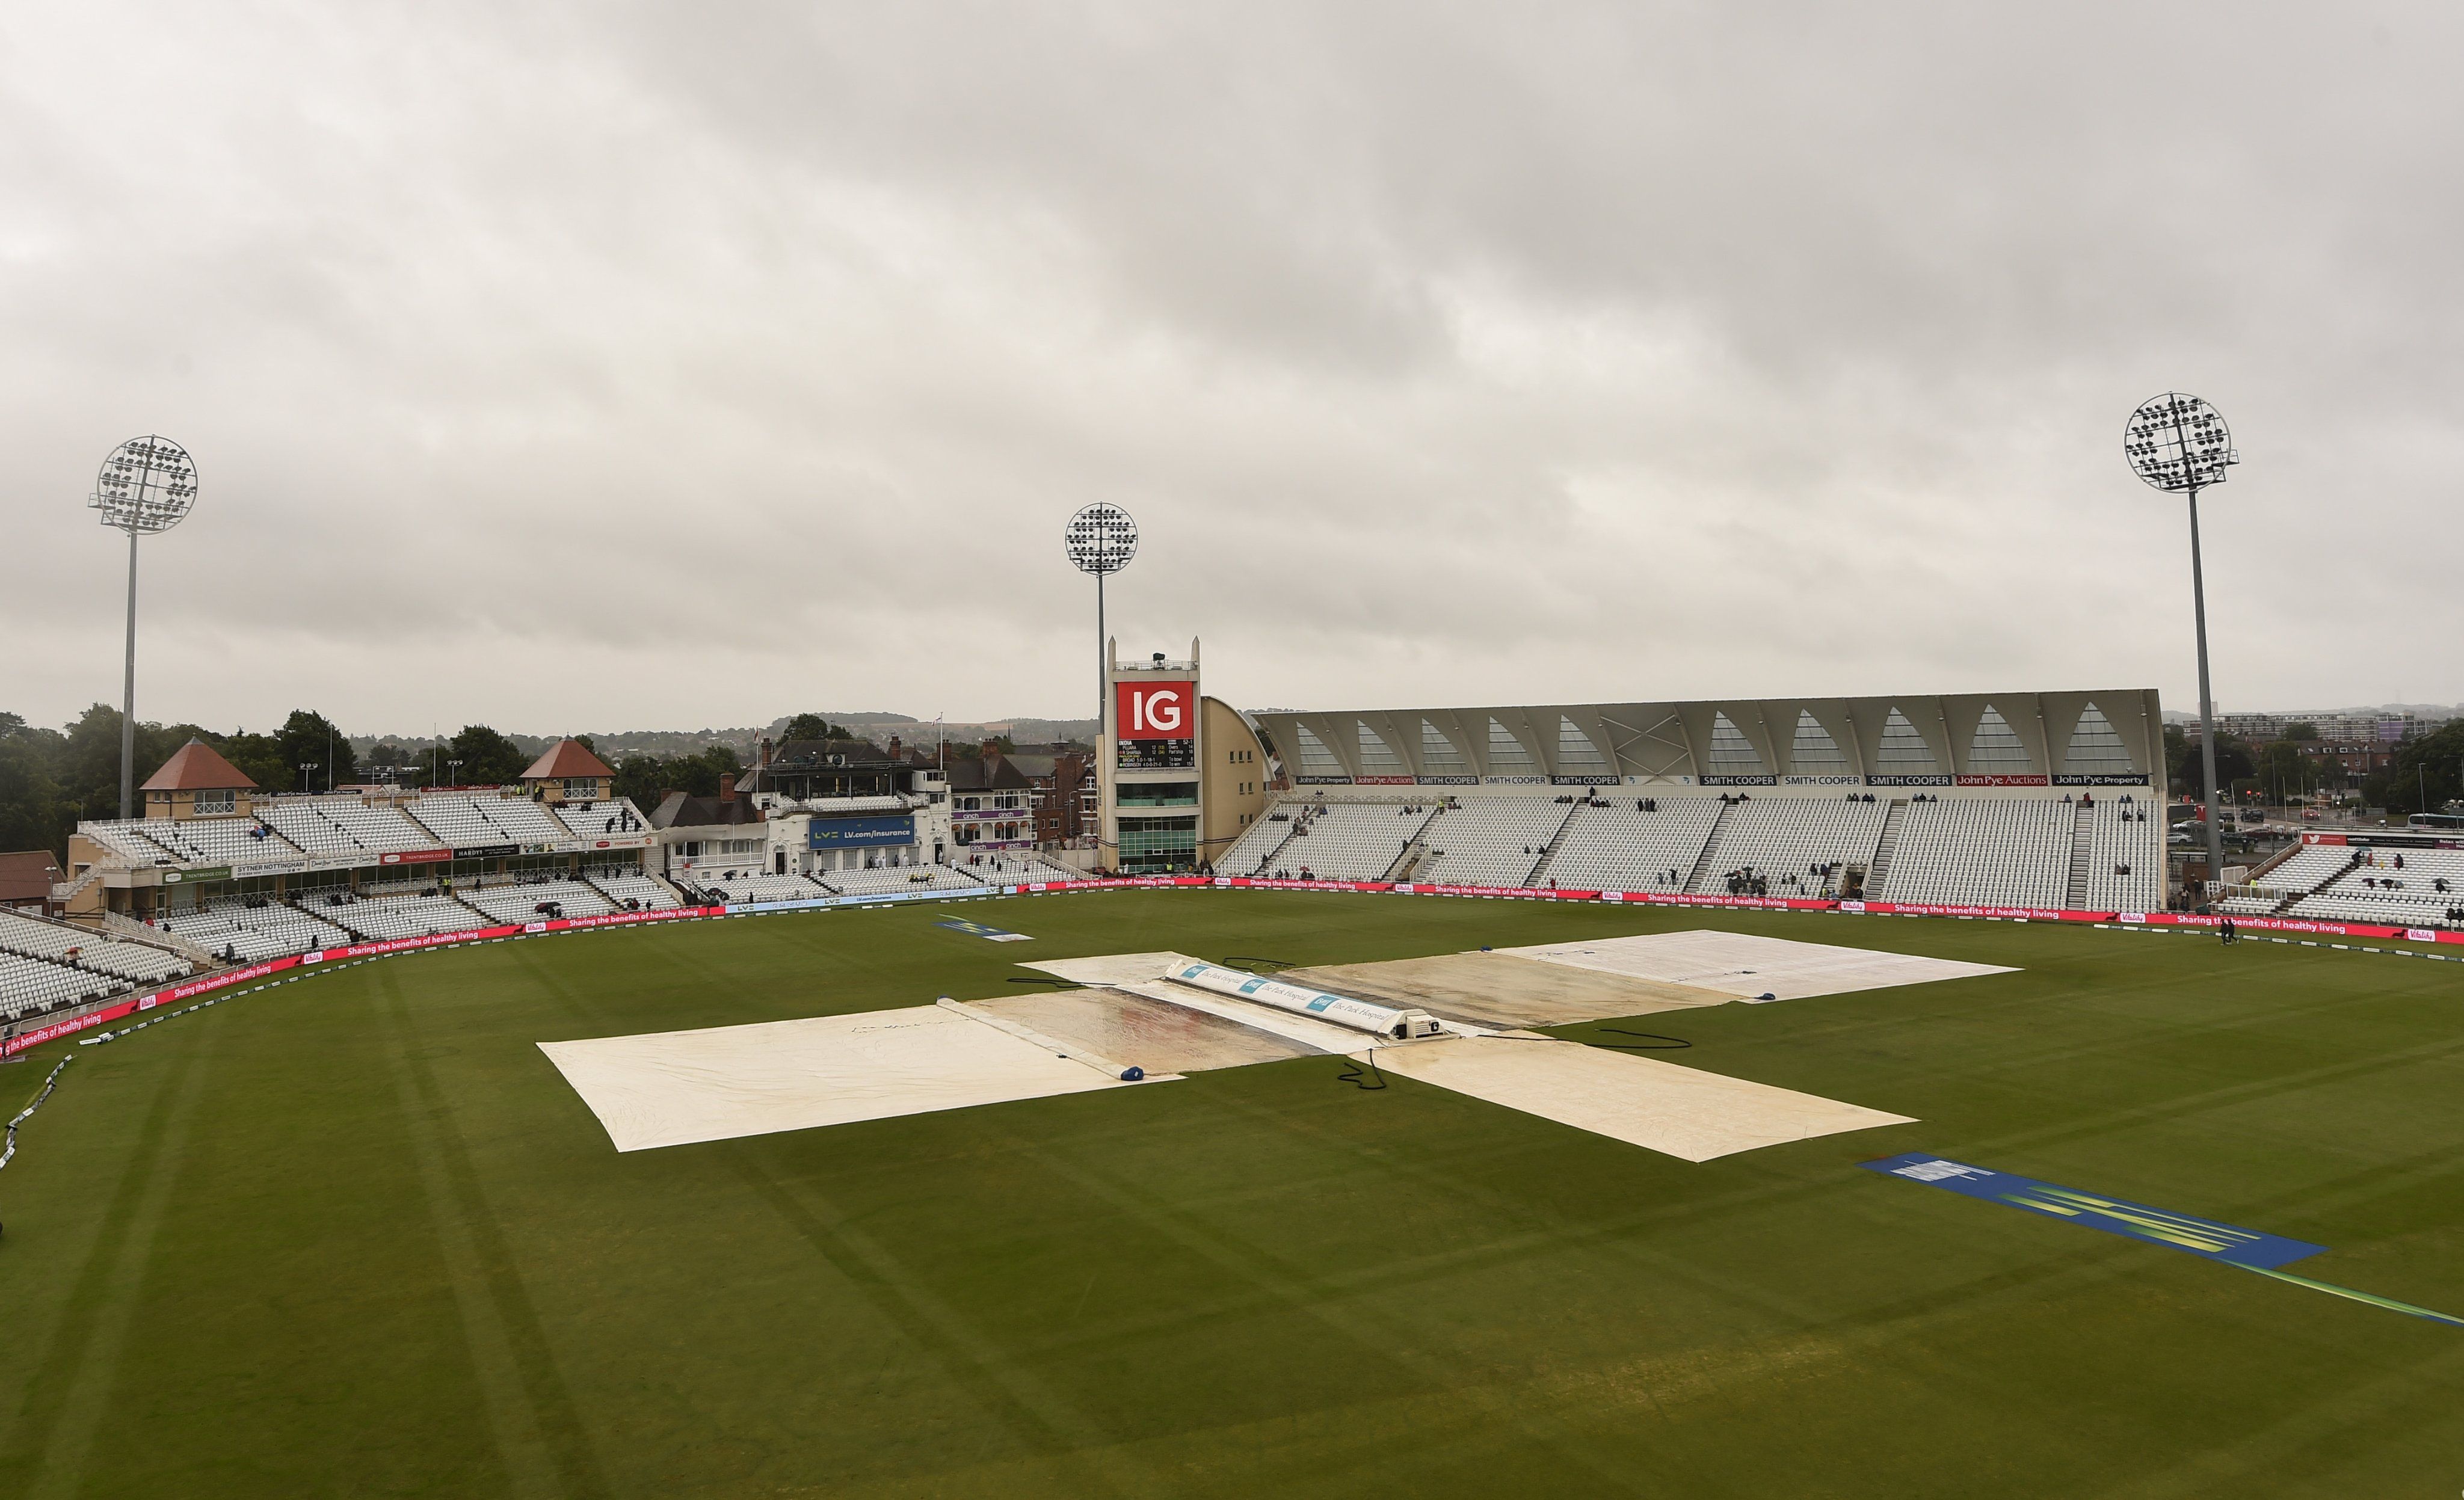 Ind vs Eng 1st test was drawn due to rain.